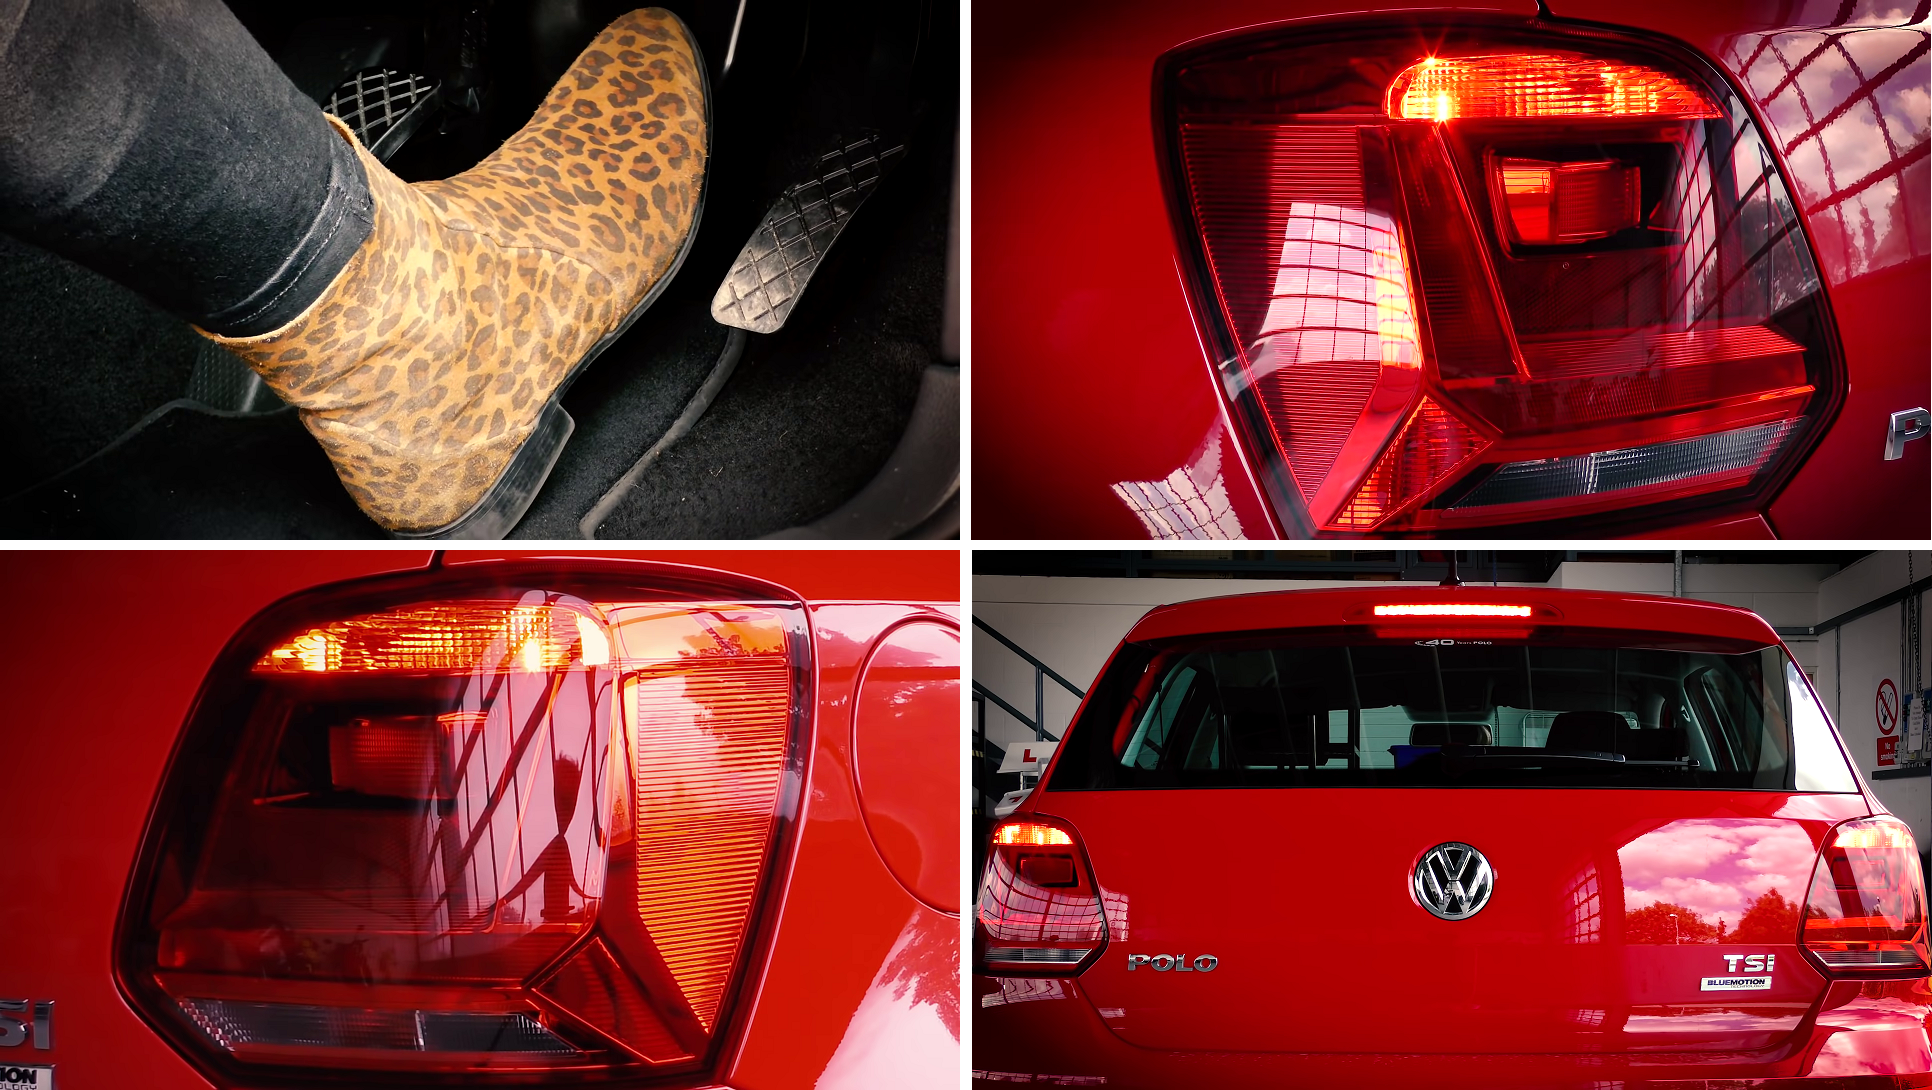 A unified guide captured in a single image, featuring four sequentially arranged images (1, 2, 3, 4) with white borders. The visual instructions offer a step-by-step demonstration on how to effectively check and verify the proper functioning of brake lights for optimal vehicle safety.